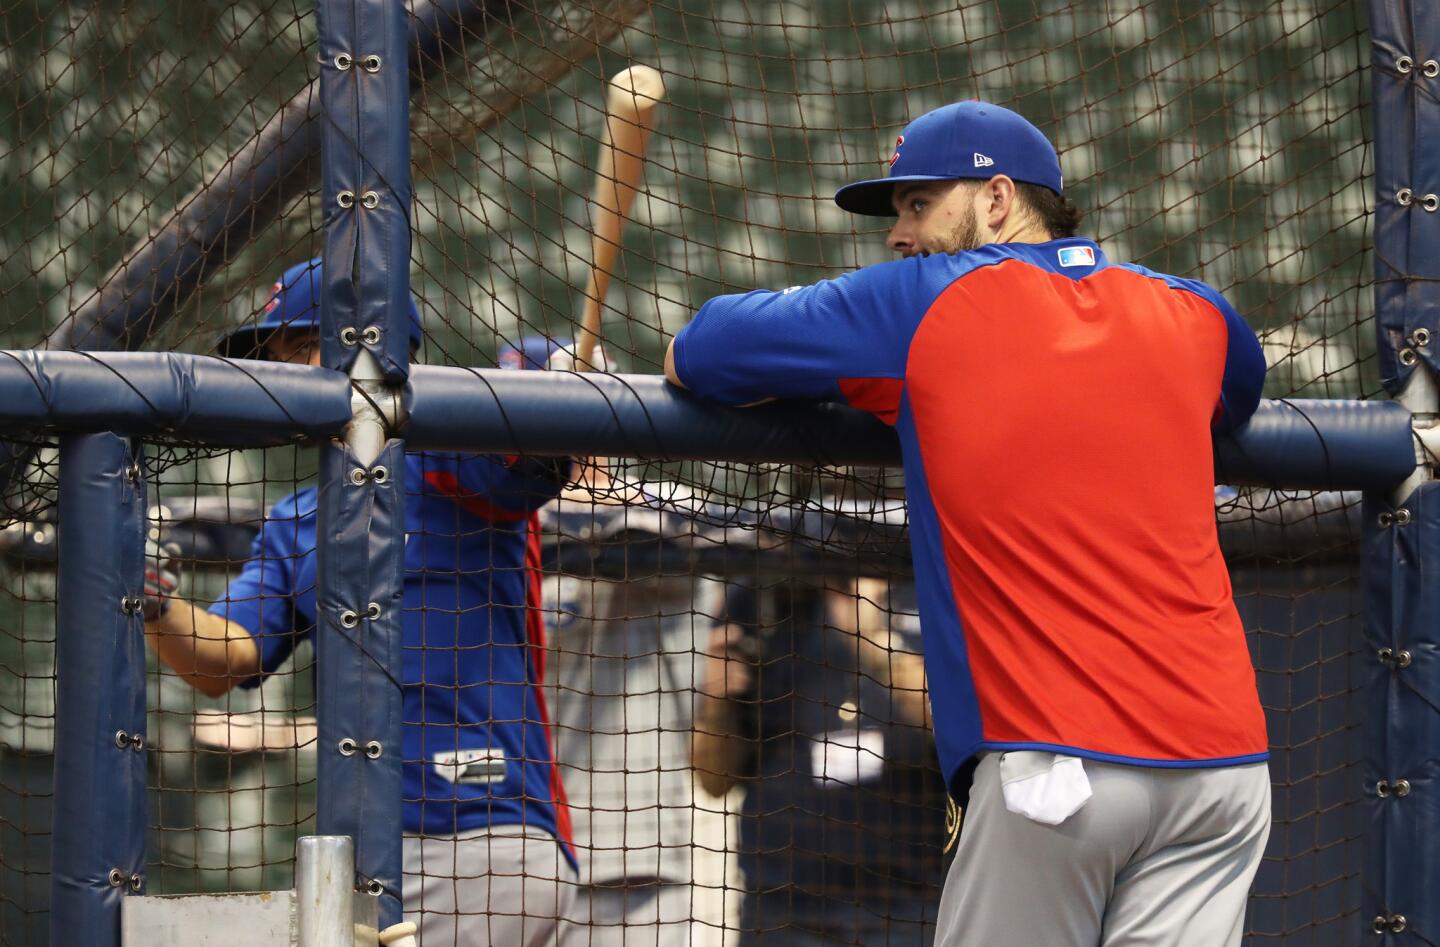 Cubs third baseman Kris Bryant watches teammate Willson Contreras take batting practice before a game against the Brewers at Miller Park on Sept. 5, 2018.